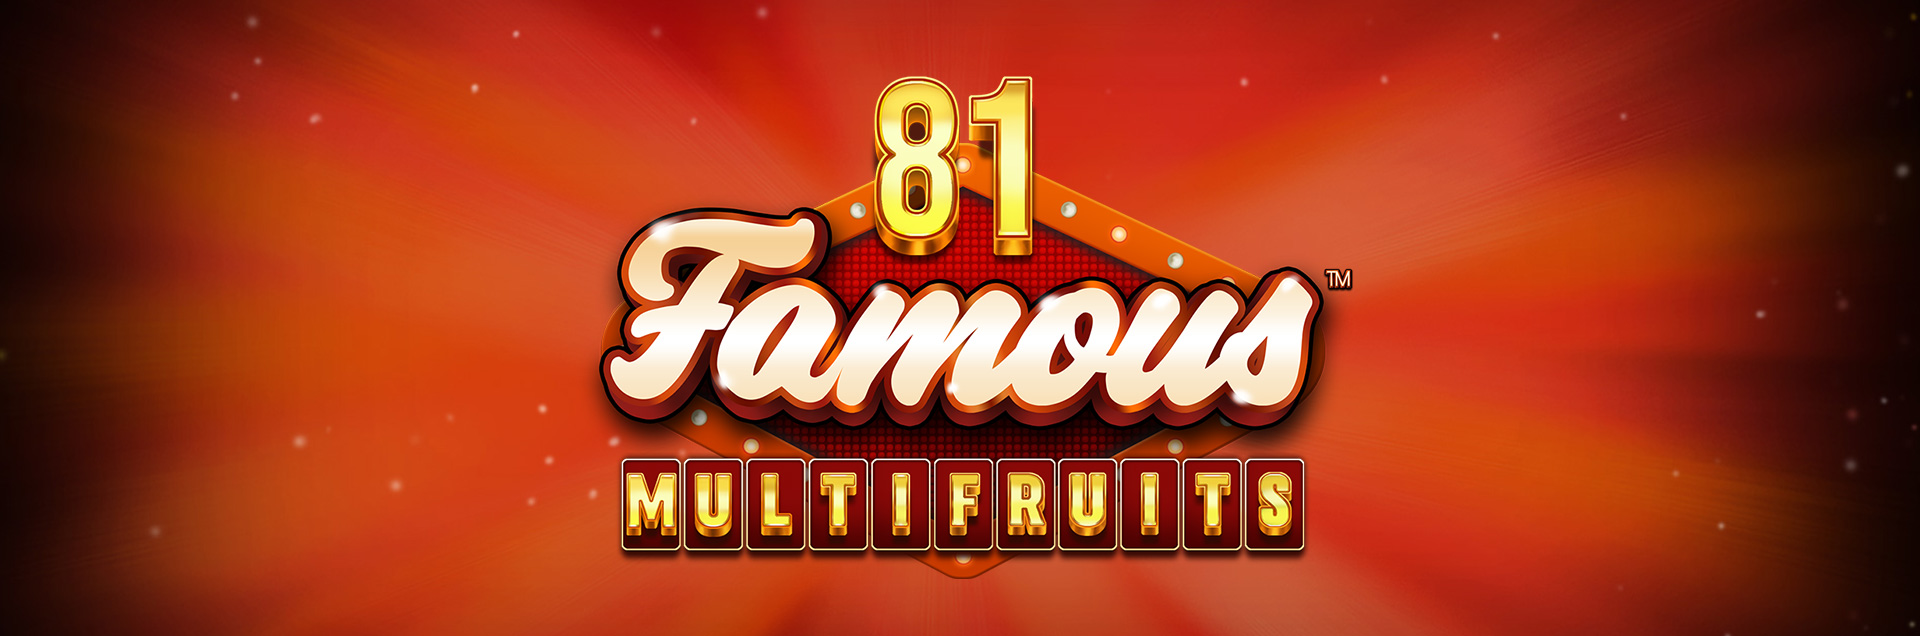 81Faamous Multifruits header games